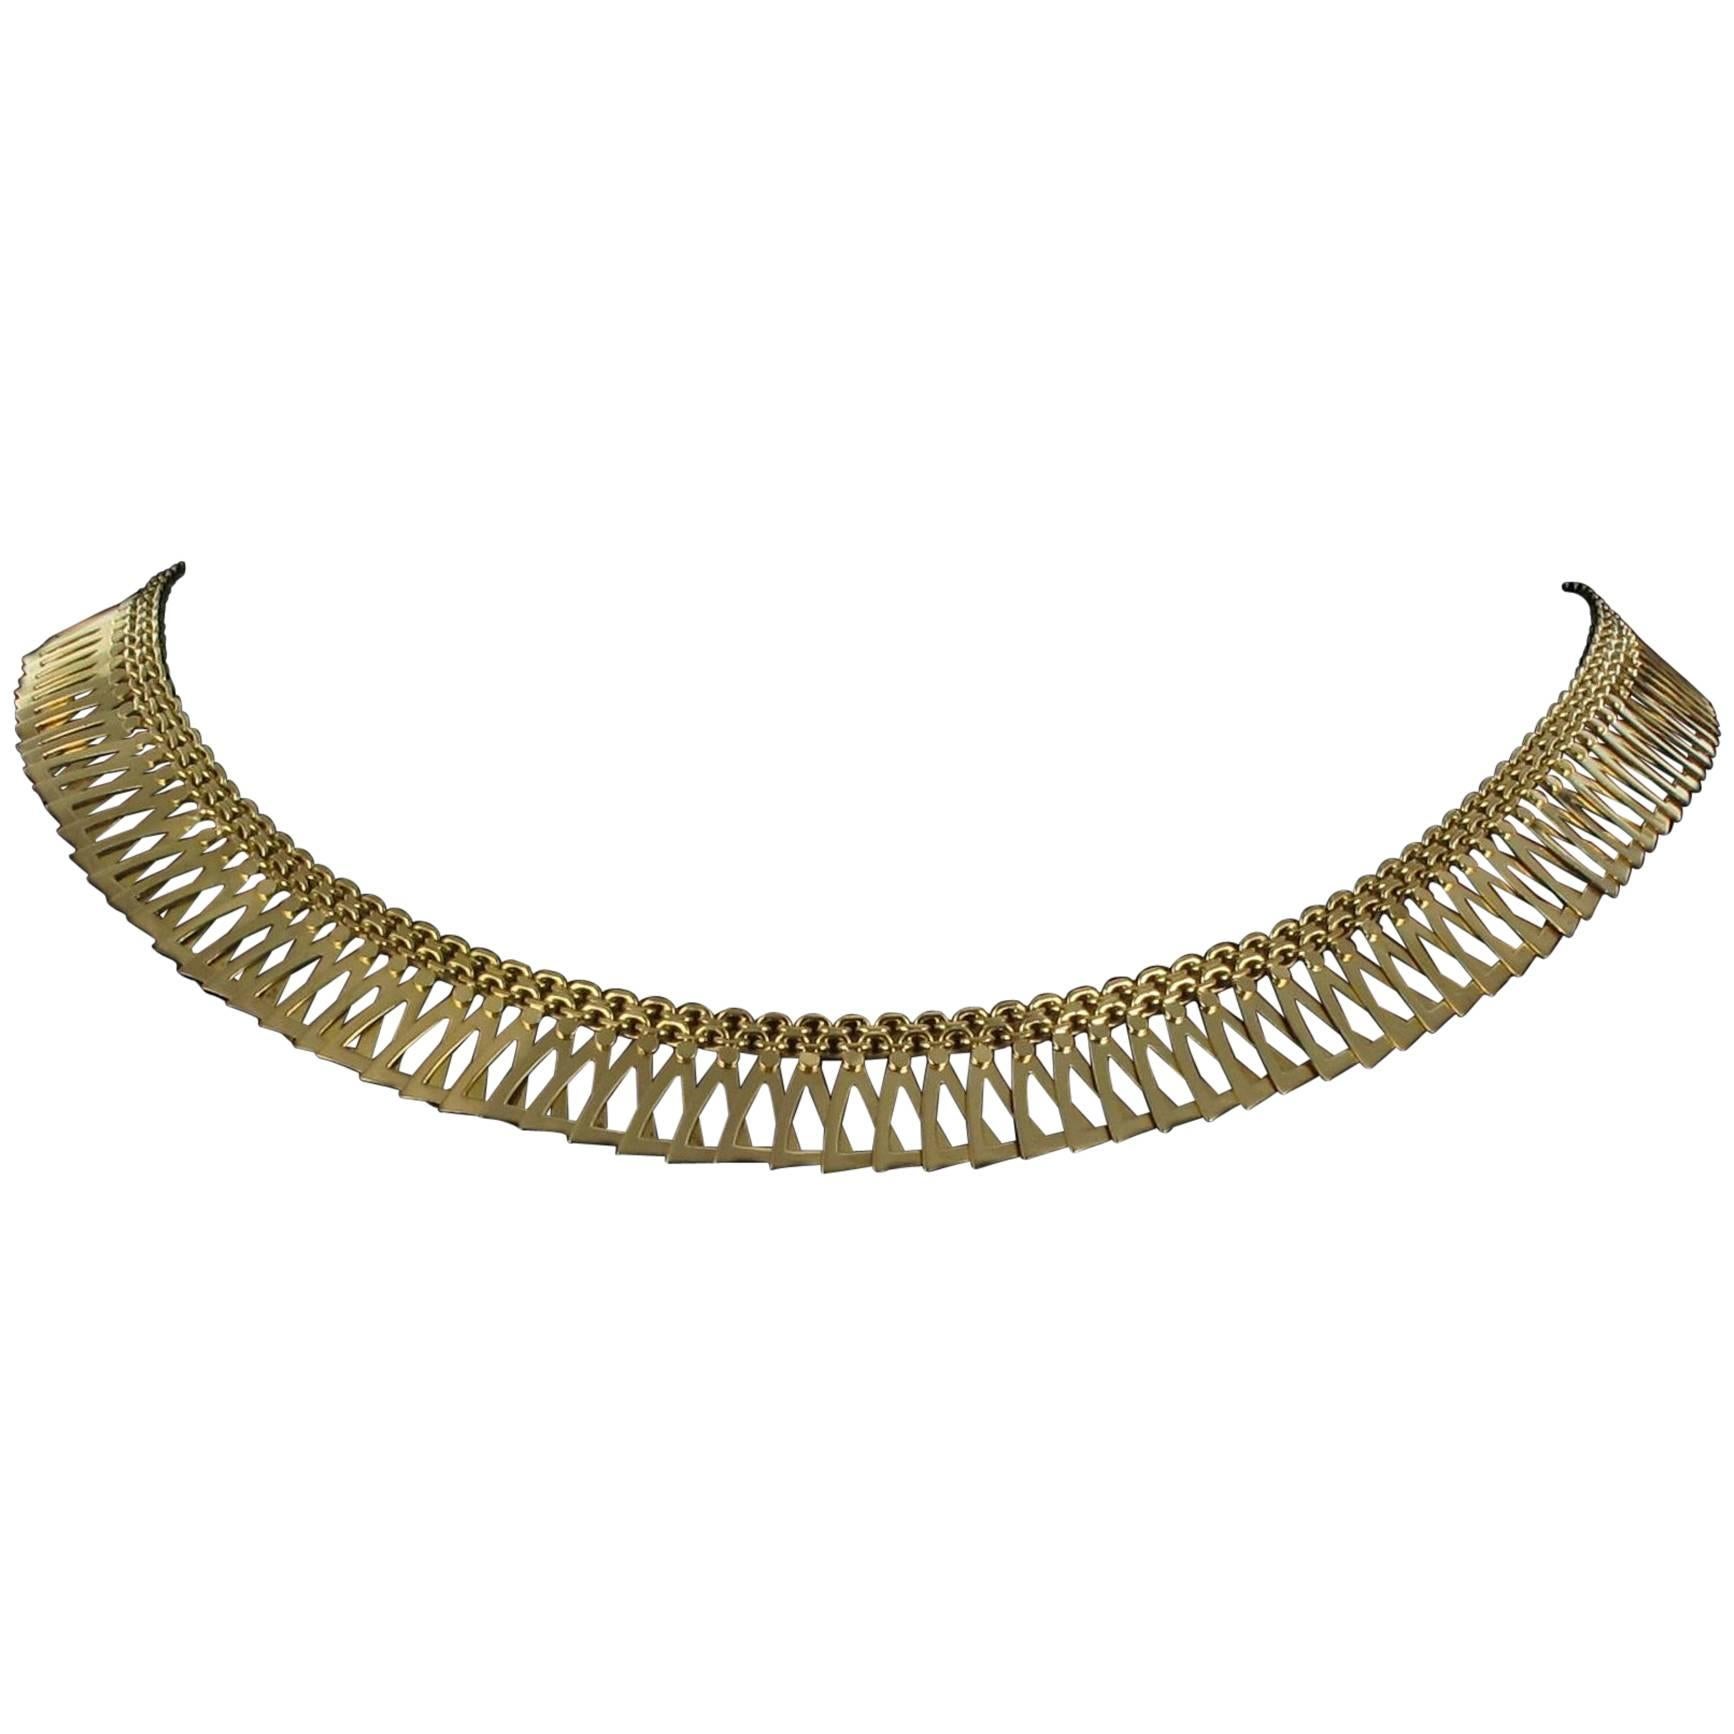 18 carat yellow gold necklace, eagle head hallmark.
A supple necklace formed of linked and overlapping triangular motifs joined at the top by a double belcher chain. This necklace has an 8 ratchet safety clasp.  
Height of grounds: 0.9 cm, width of